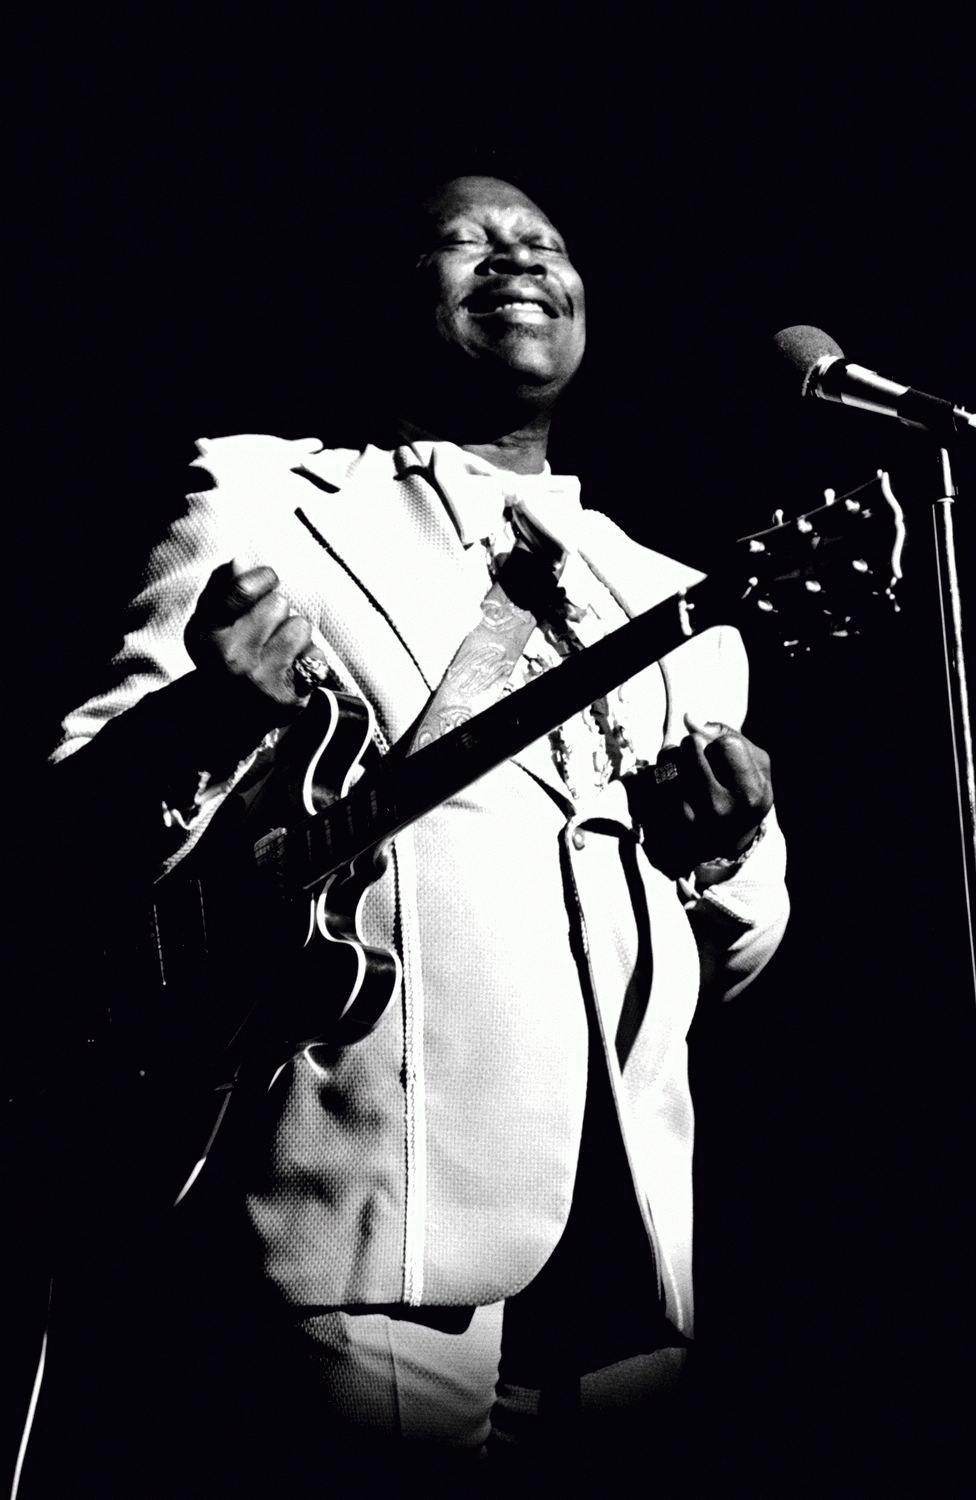 B.B. King with Lucille, West Village, NY, 1976